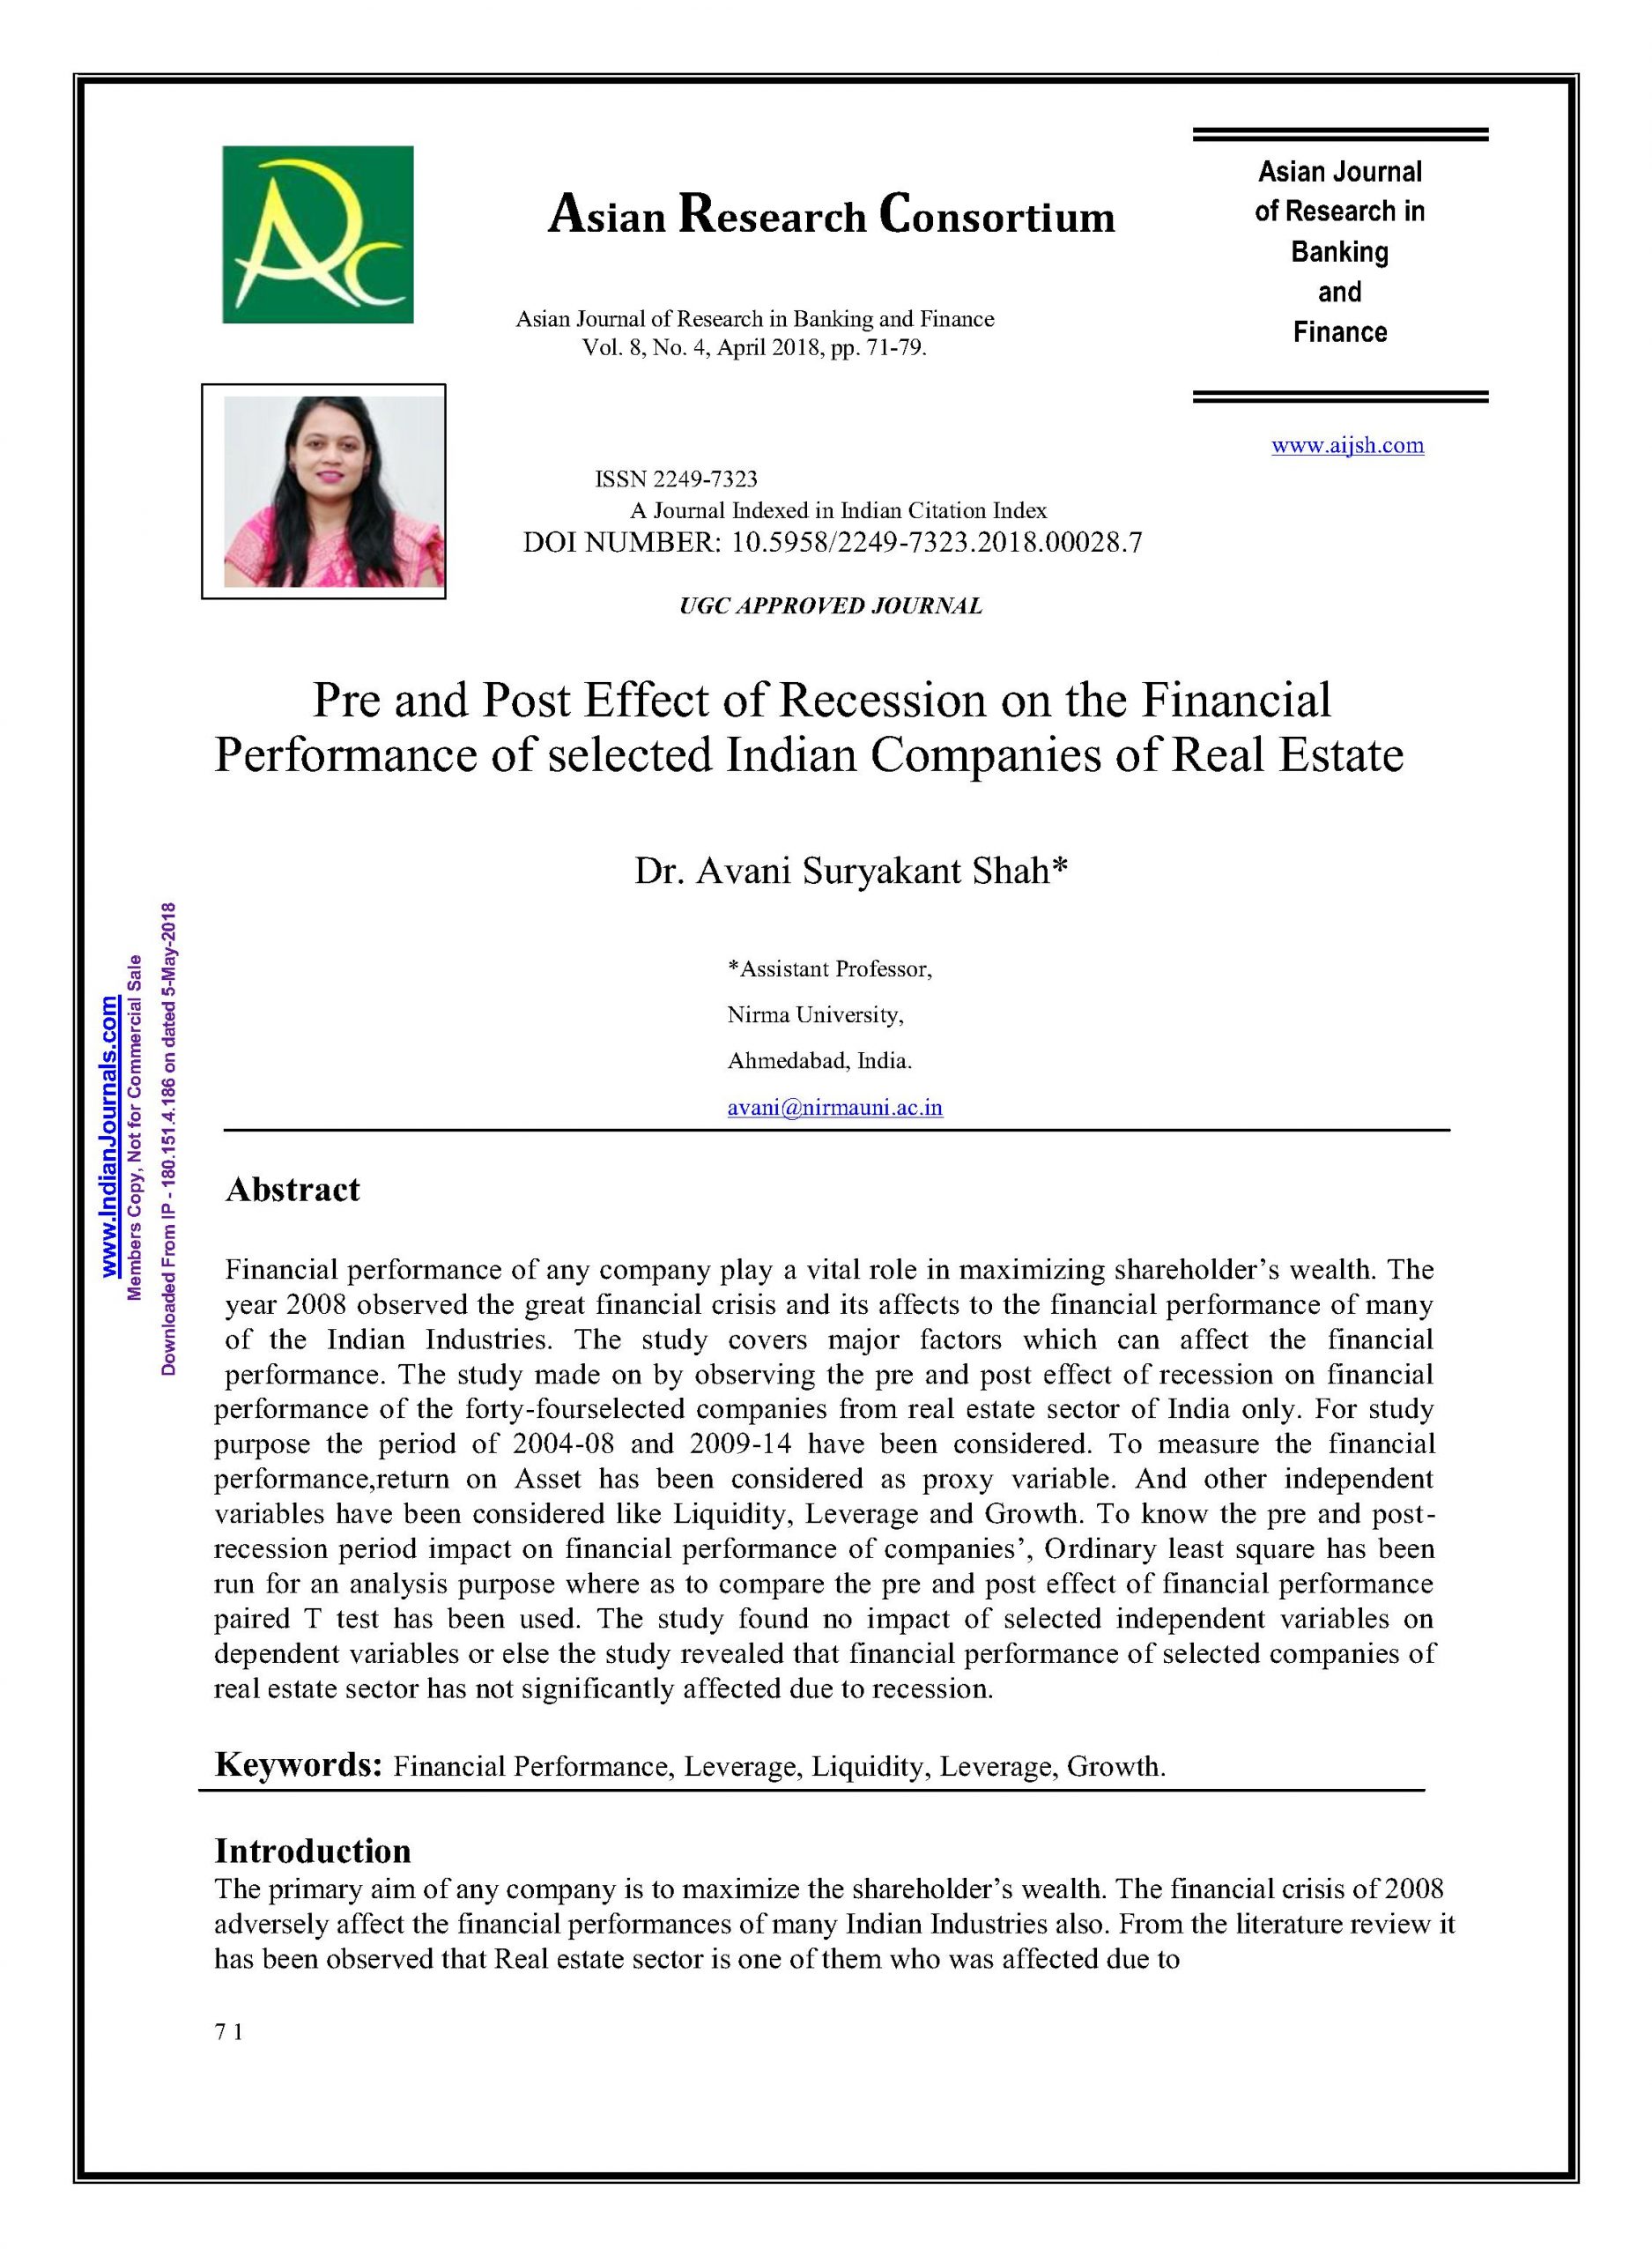 Pre and Post Effect of Recession on the Financial Performance of selected Indian Companies of Real Estate